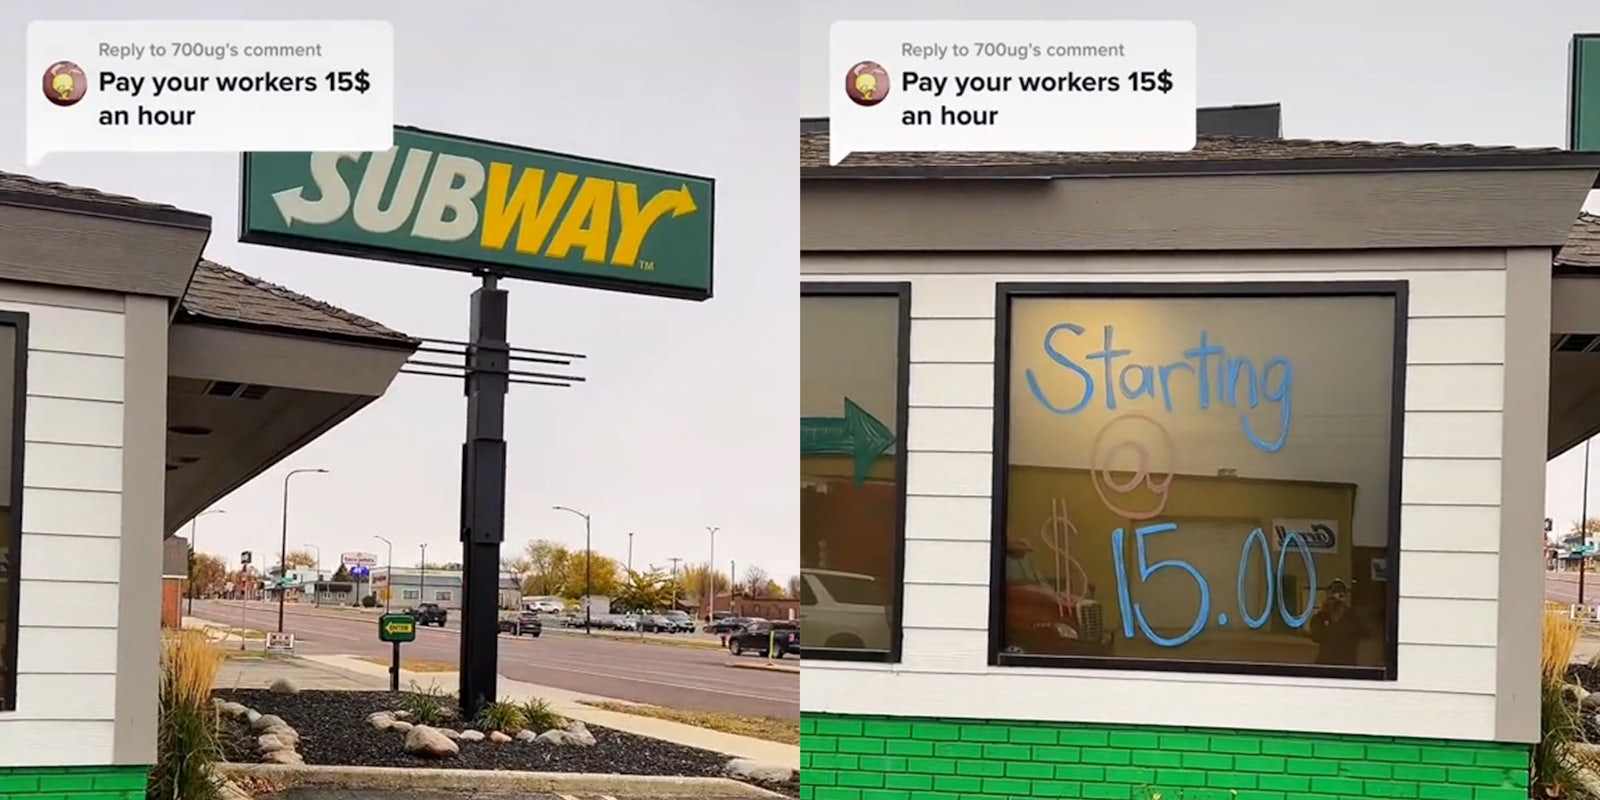 Subway with caption 'Pay your workers 15$ an hour' (l) subway window painted with 'Starting @ $15.00' (r)